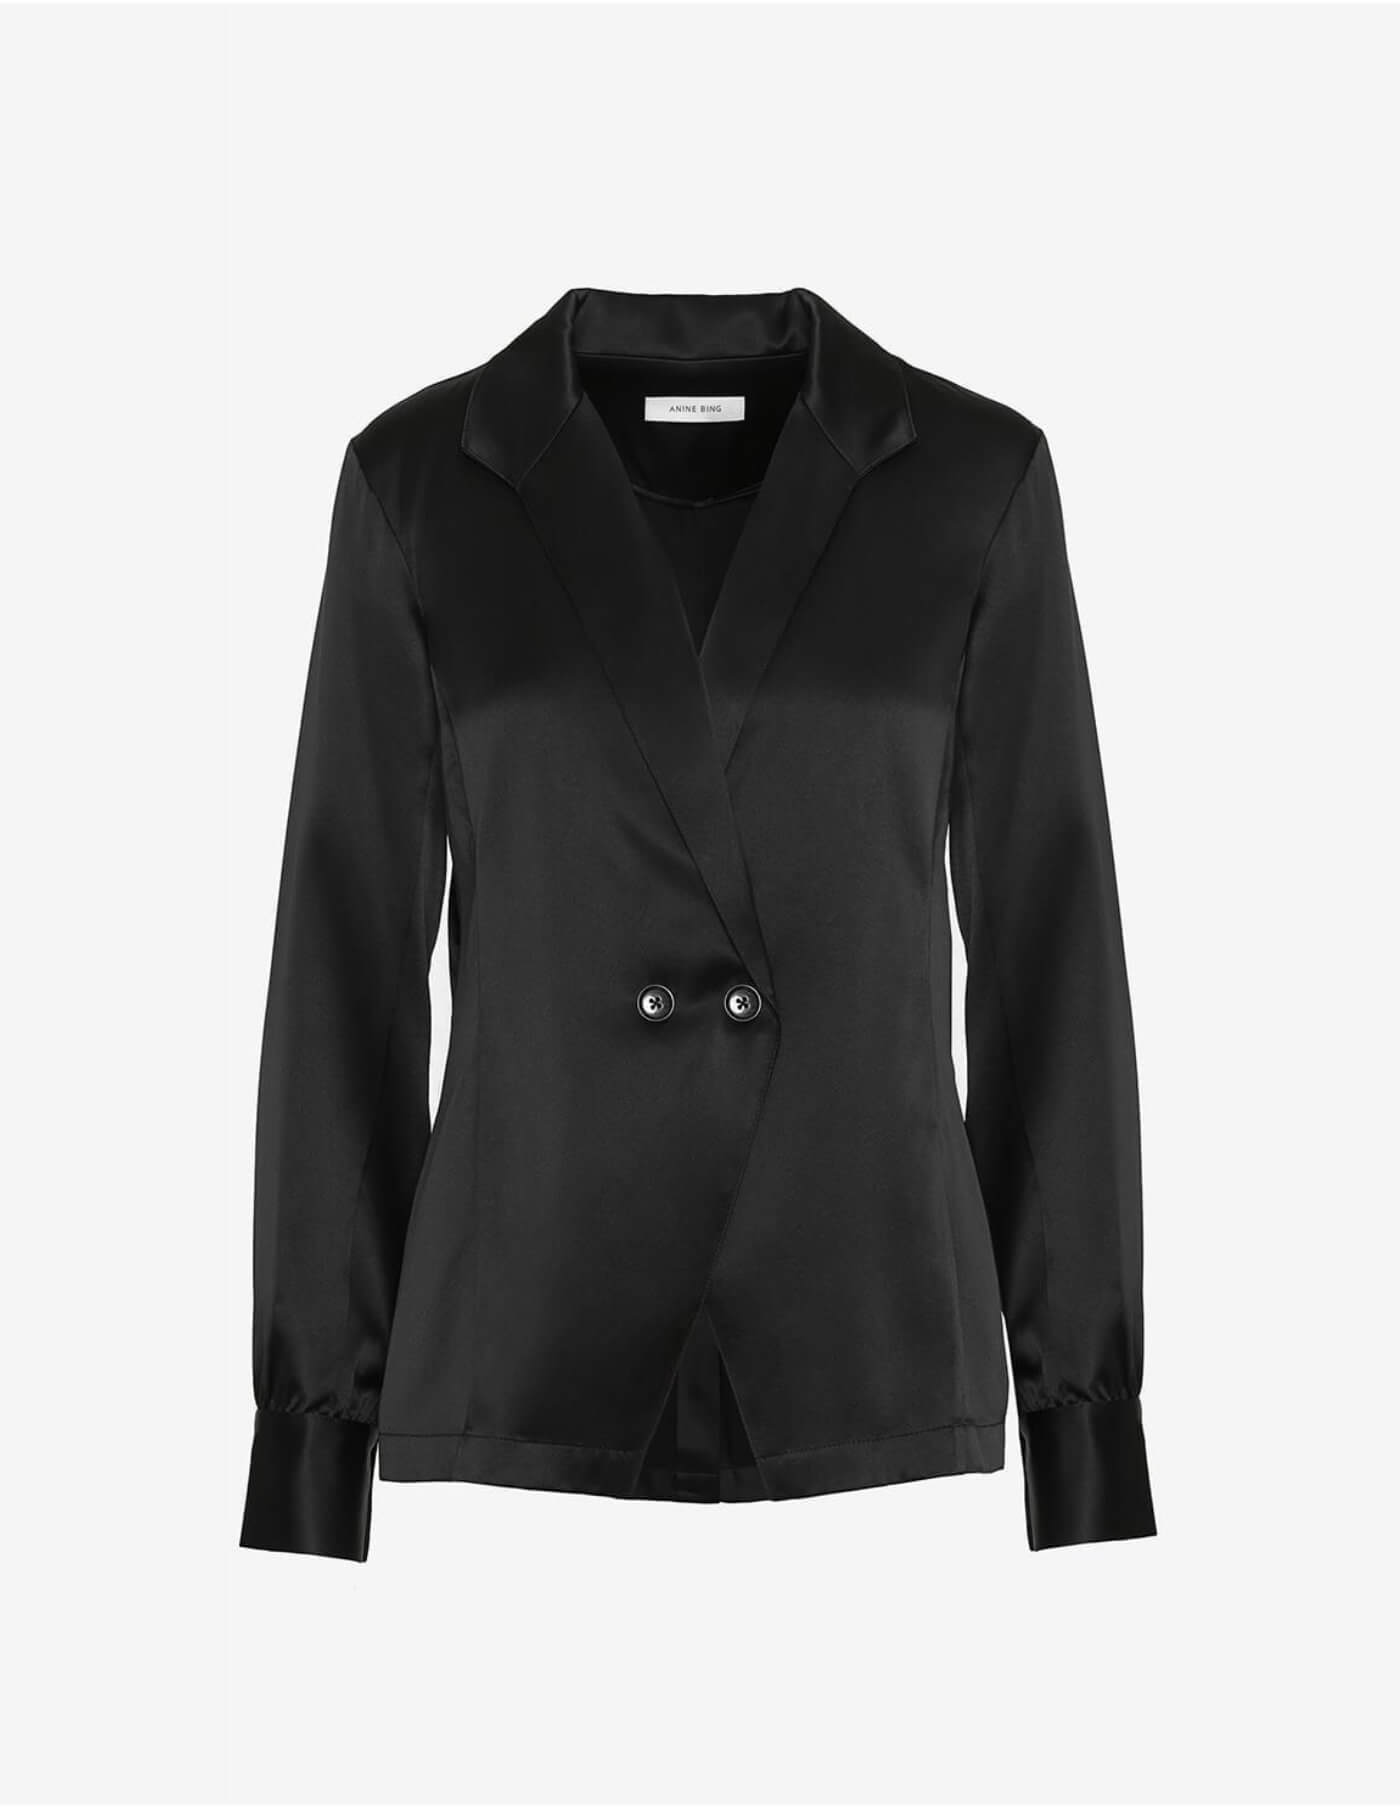 Anine Bing Isabella Blouse In Black at Storm Fashion